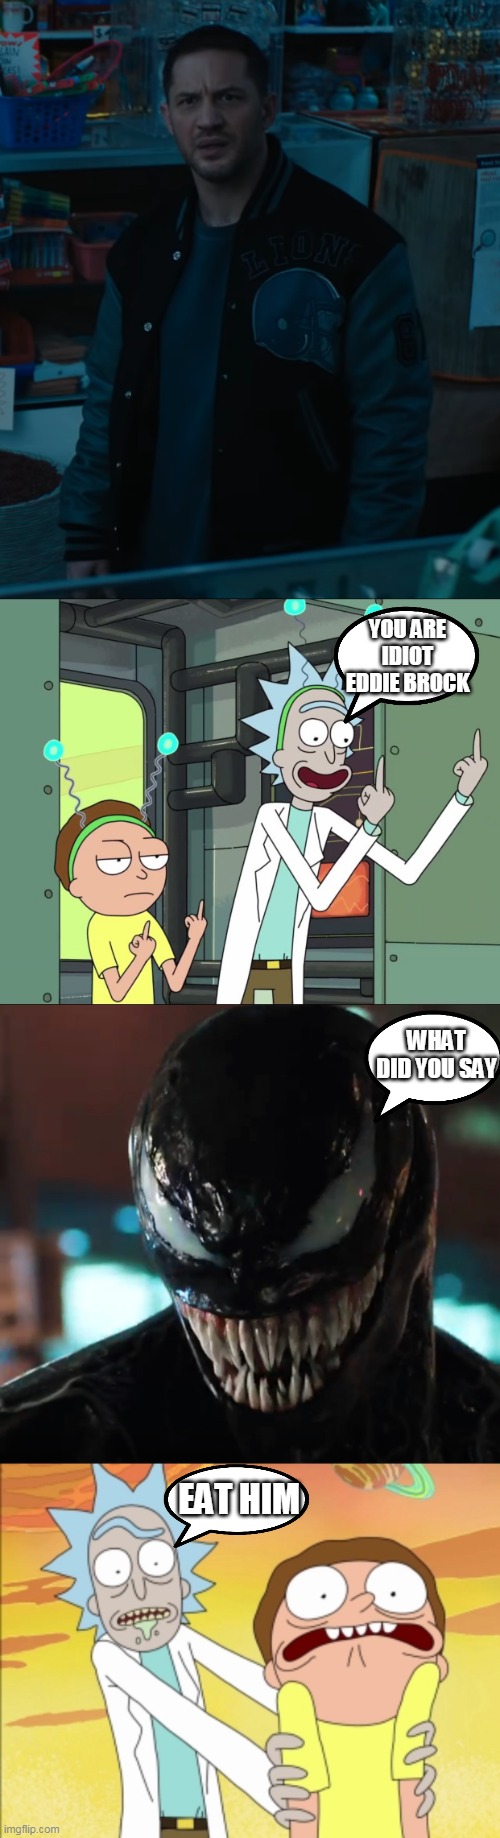 YOU ARE IDIOT EDDIE BROCK; WHAT DID YOU SAY; EAT HIM | image tagged in confused eddie brock,rick and morty middle finger,venom,rick and morty | made w/ Imgflip meme maker